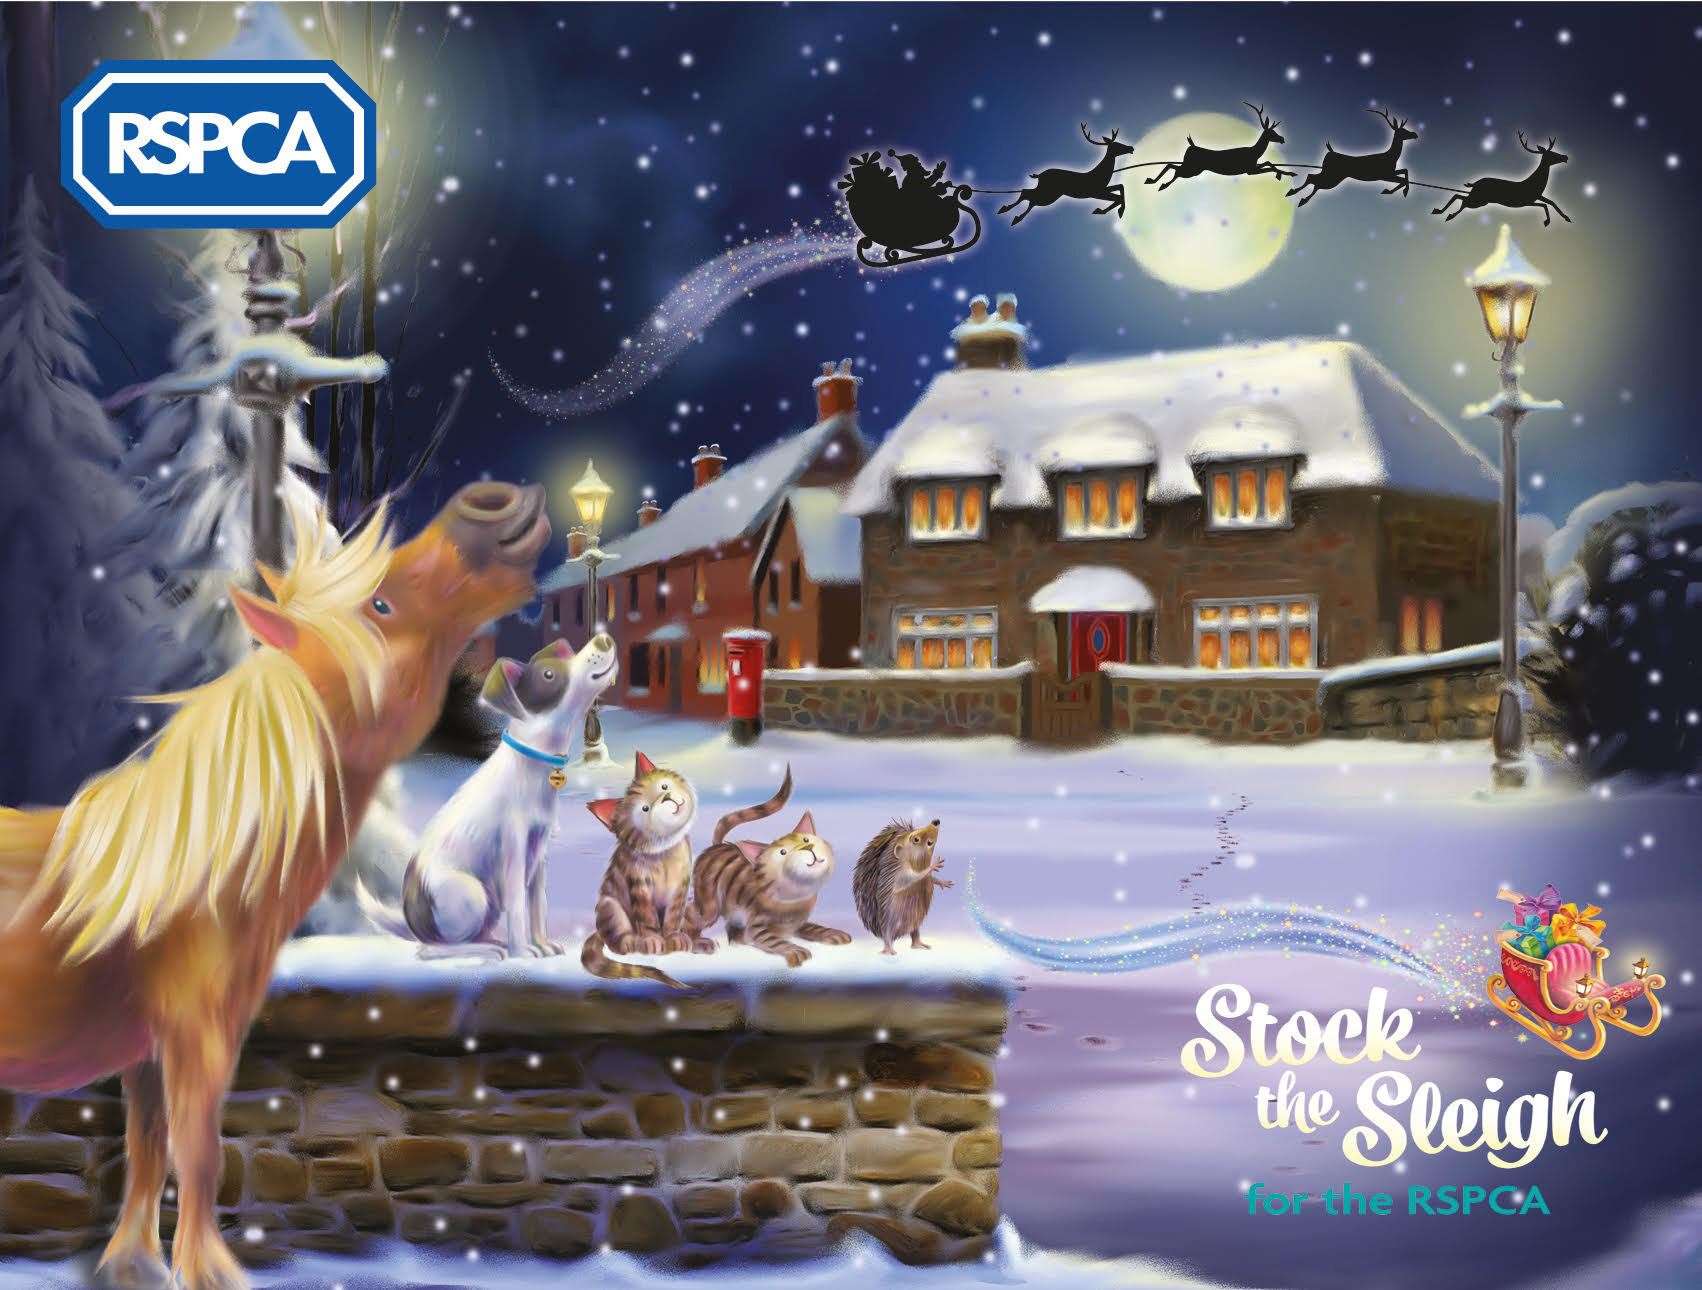 The RSPCA is appealing for donations to help animals in need this Christmas